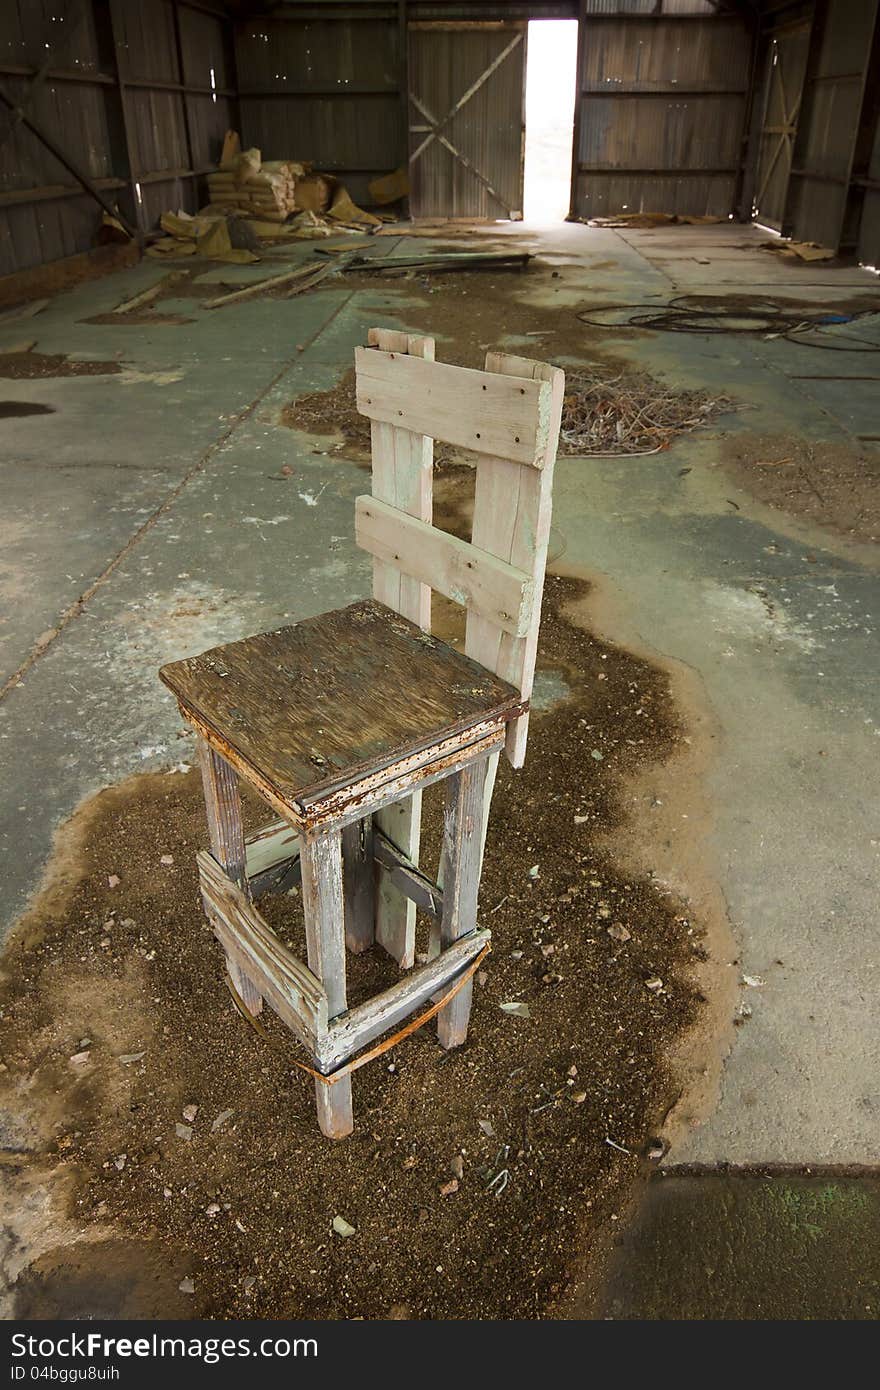 Grungy Old Chair in Warehouse with dirt on floor